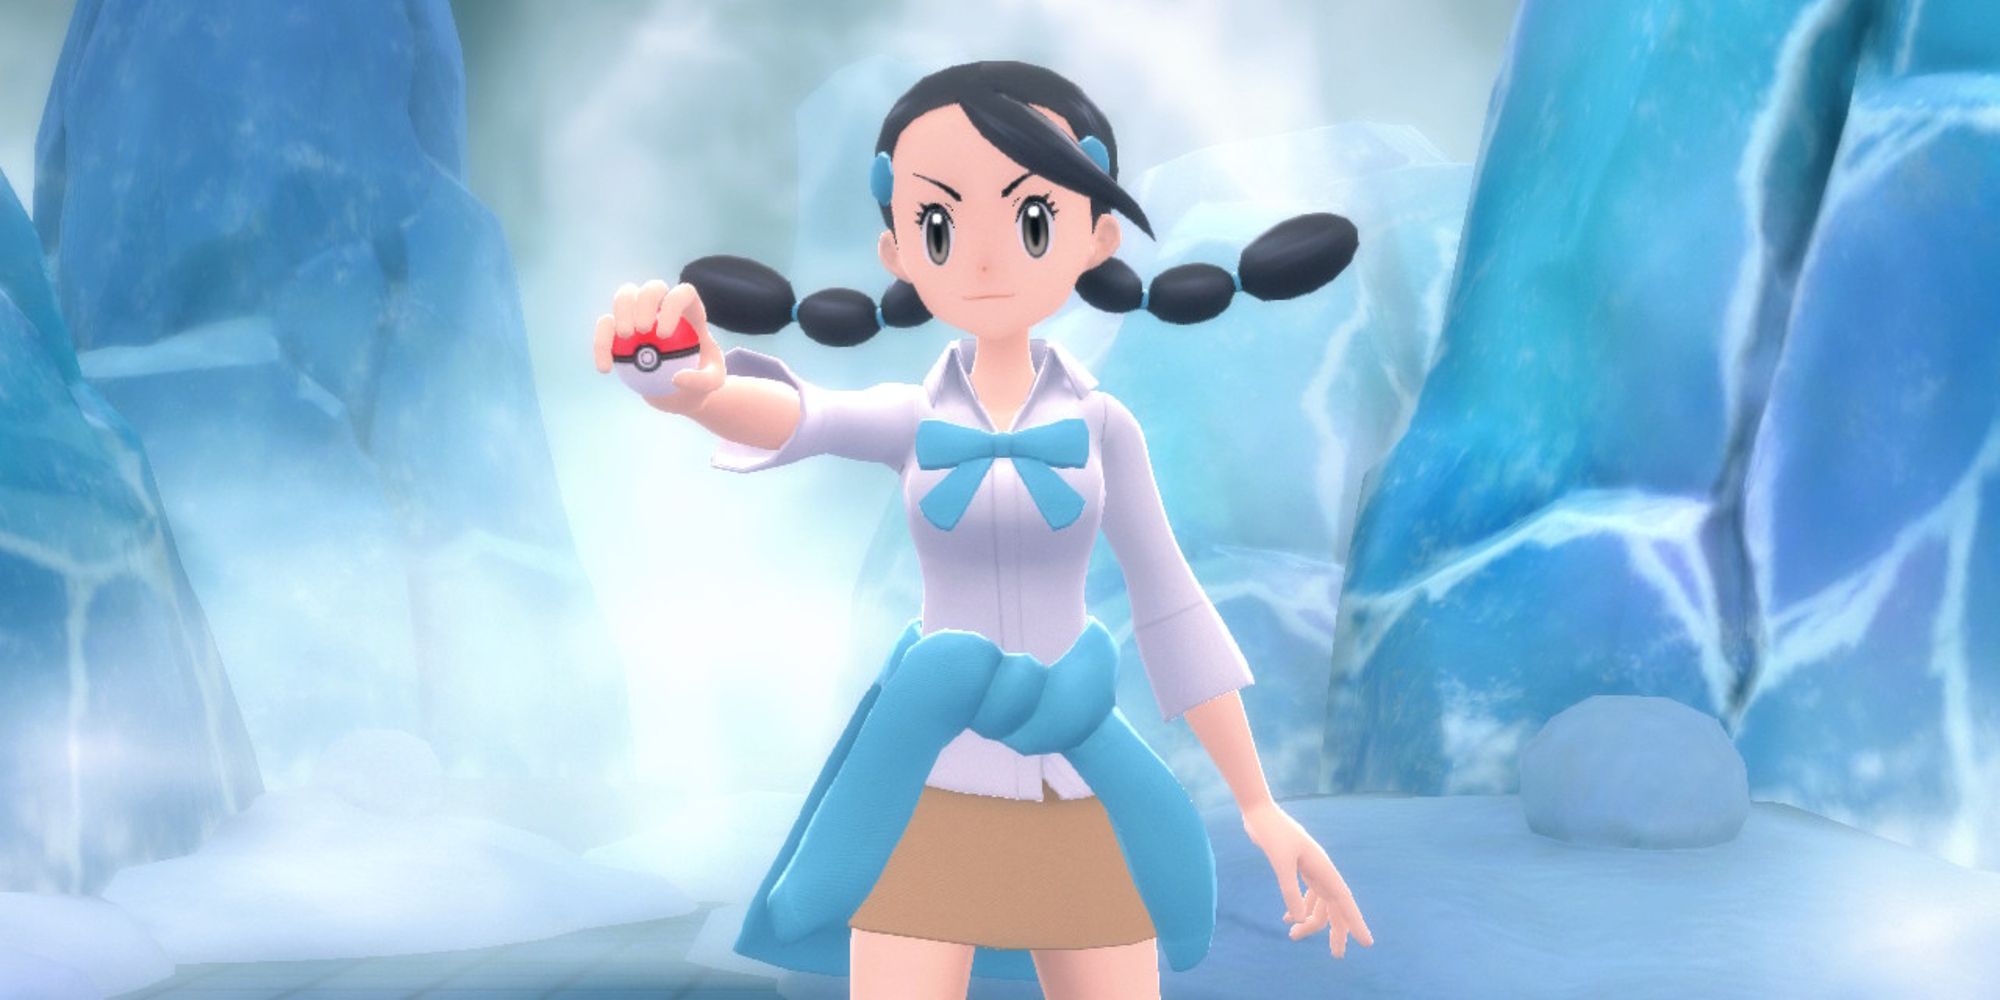 Candice pointing to the camera in Pokémon BDSP